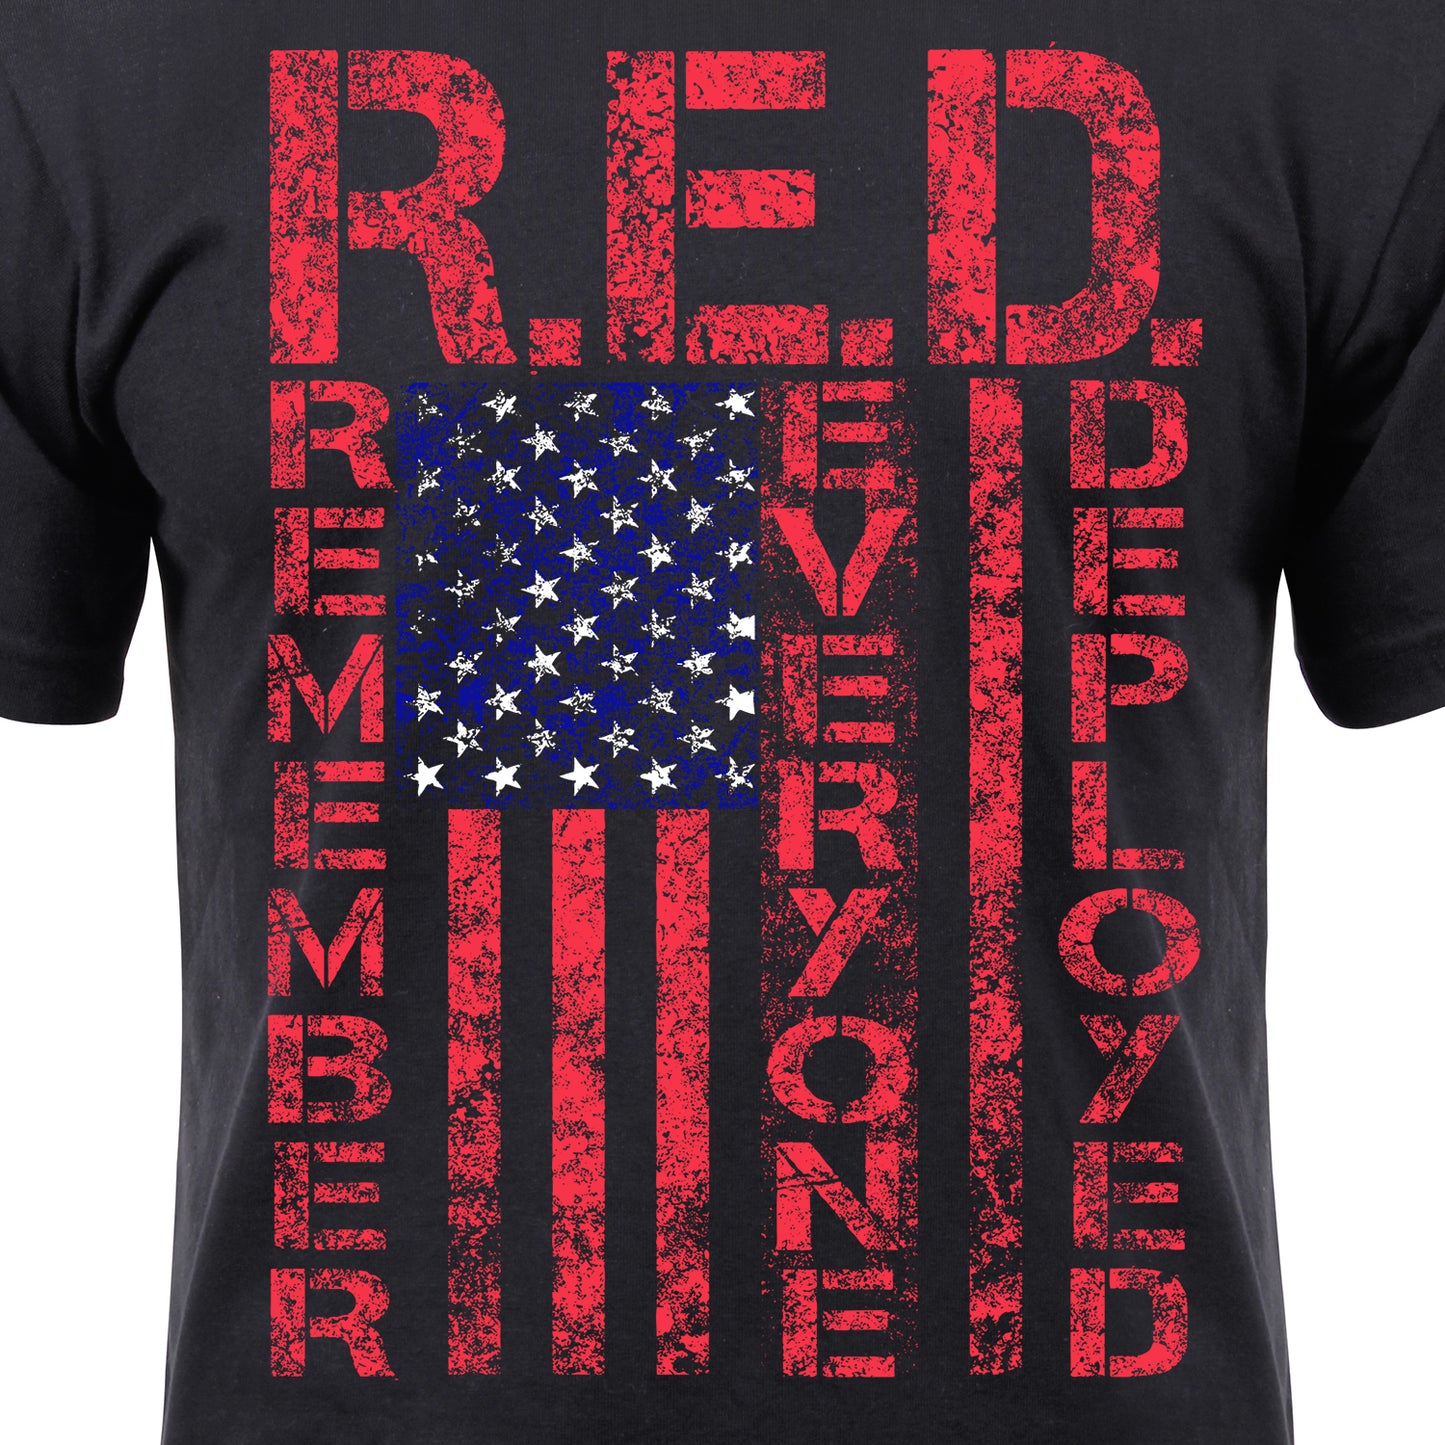 T-Shirt: R.E.D. (Remember Everyone Deployed) Athletic Fit